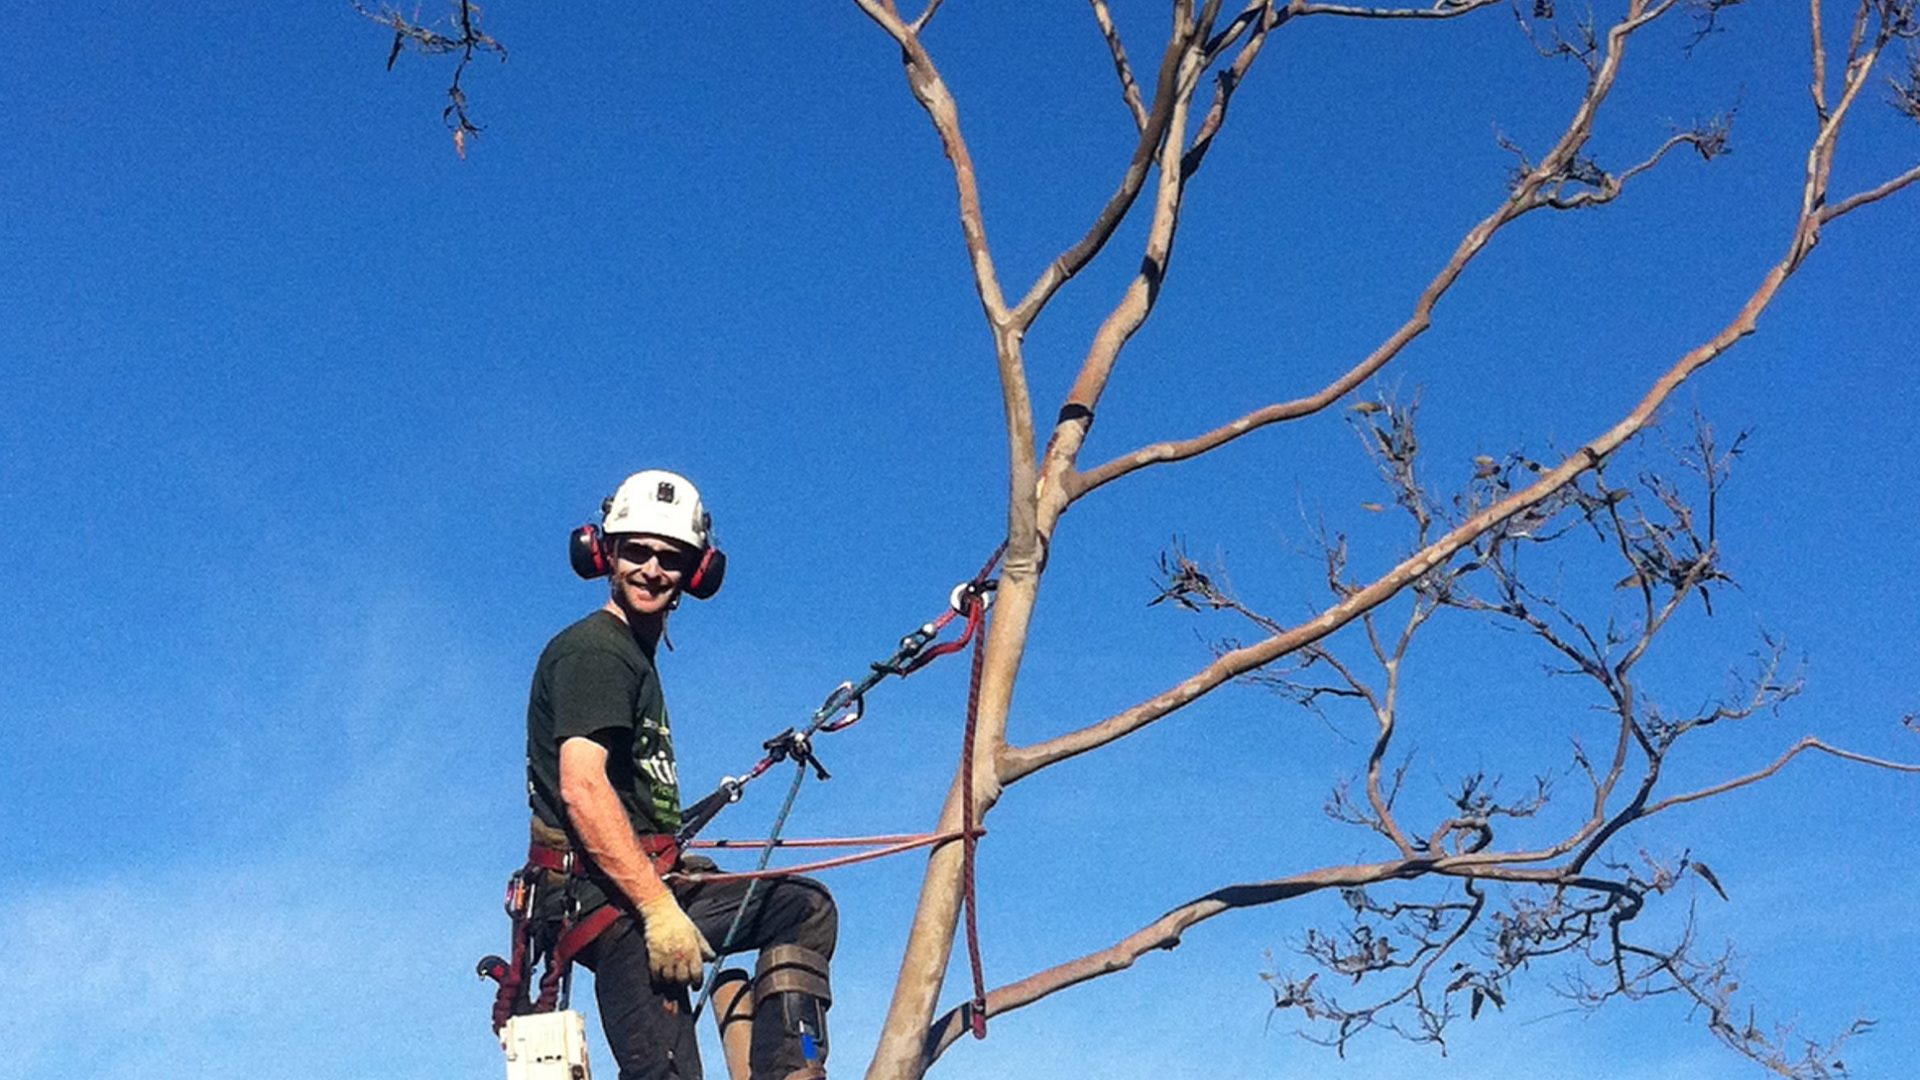 Expert Tree Felling Services in Mornington - Cut It Right Tree Services